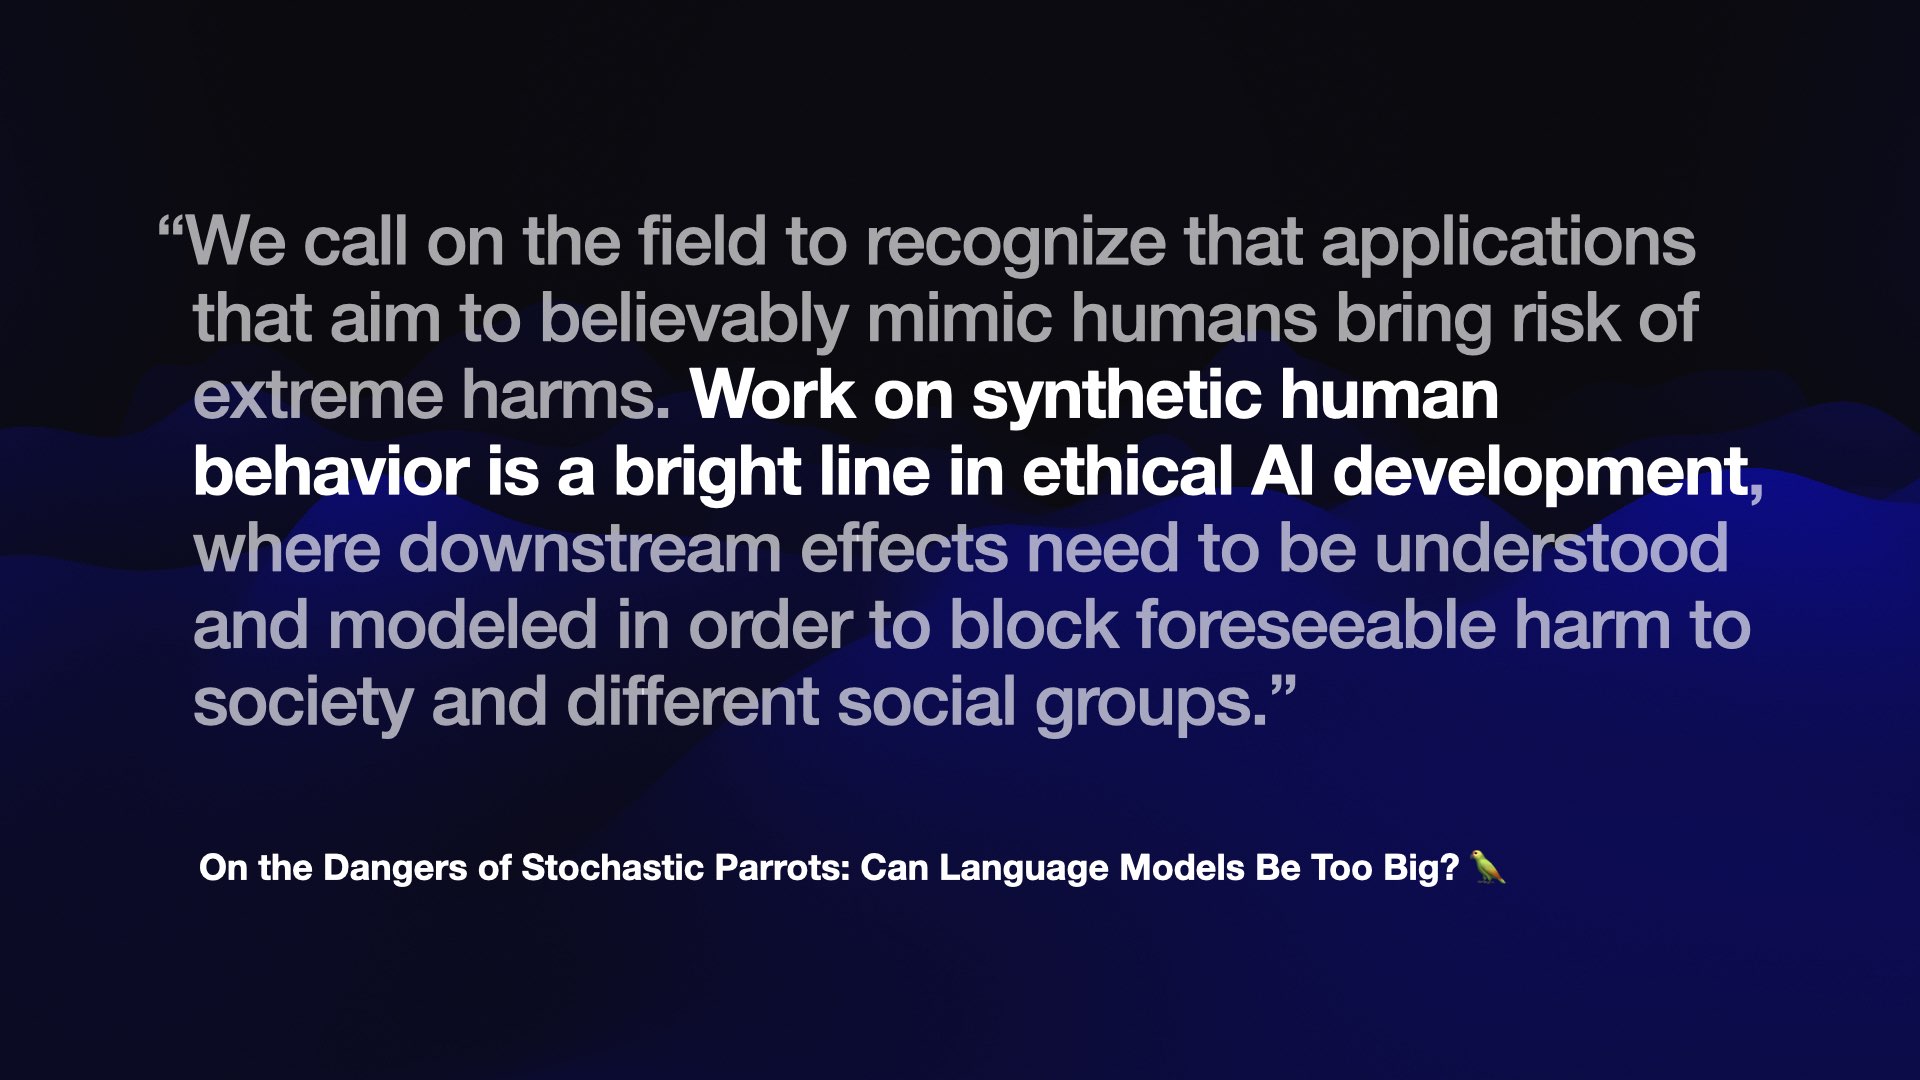 “We call on the field to recognize that applications that aim to believably mimic humans bring risk of extreme harms. Work on synthetic human behavior is a bright line in ethical AI development where downstream effects need to be understood and modeled in order to block foreseeable harm to society and different social groups.”  On the Dangers of Stochastic Parrots: Can Language Models Be Too Big?